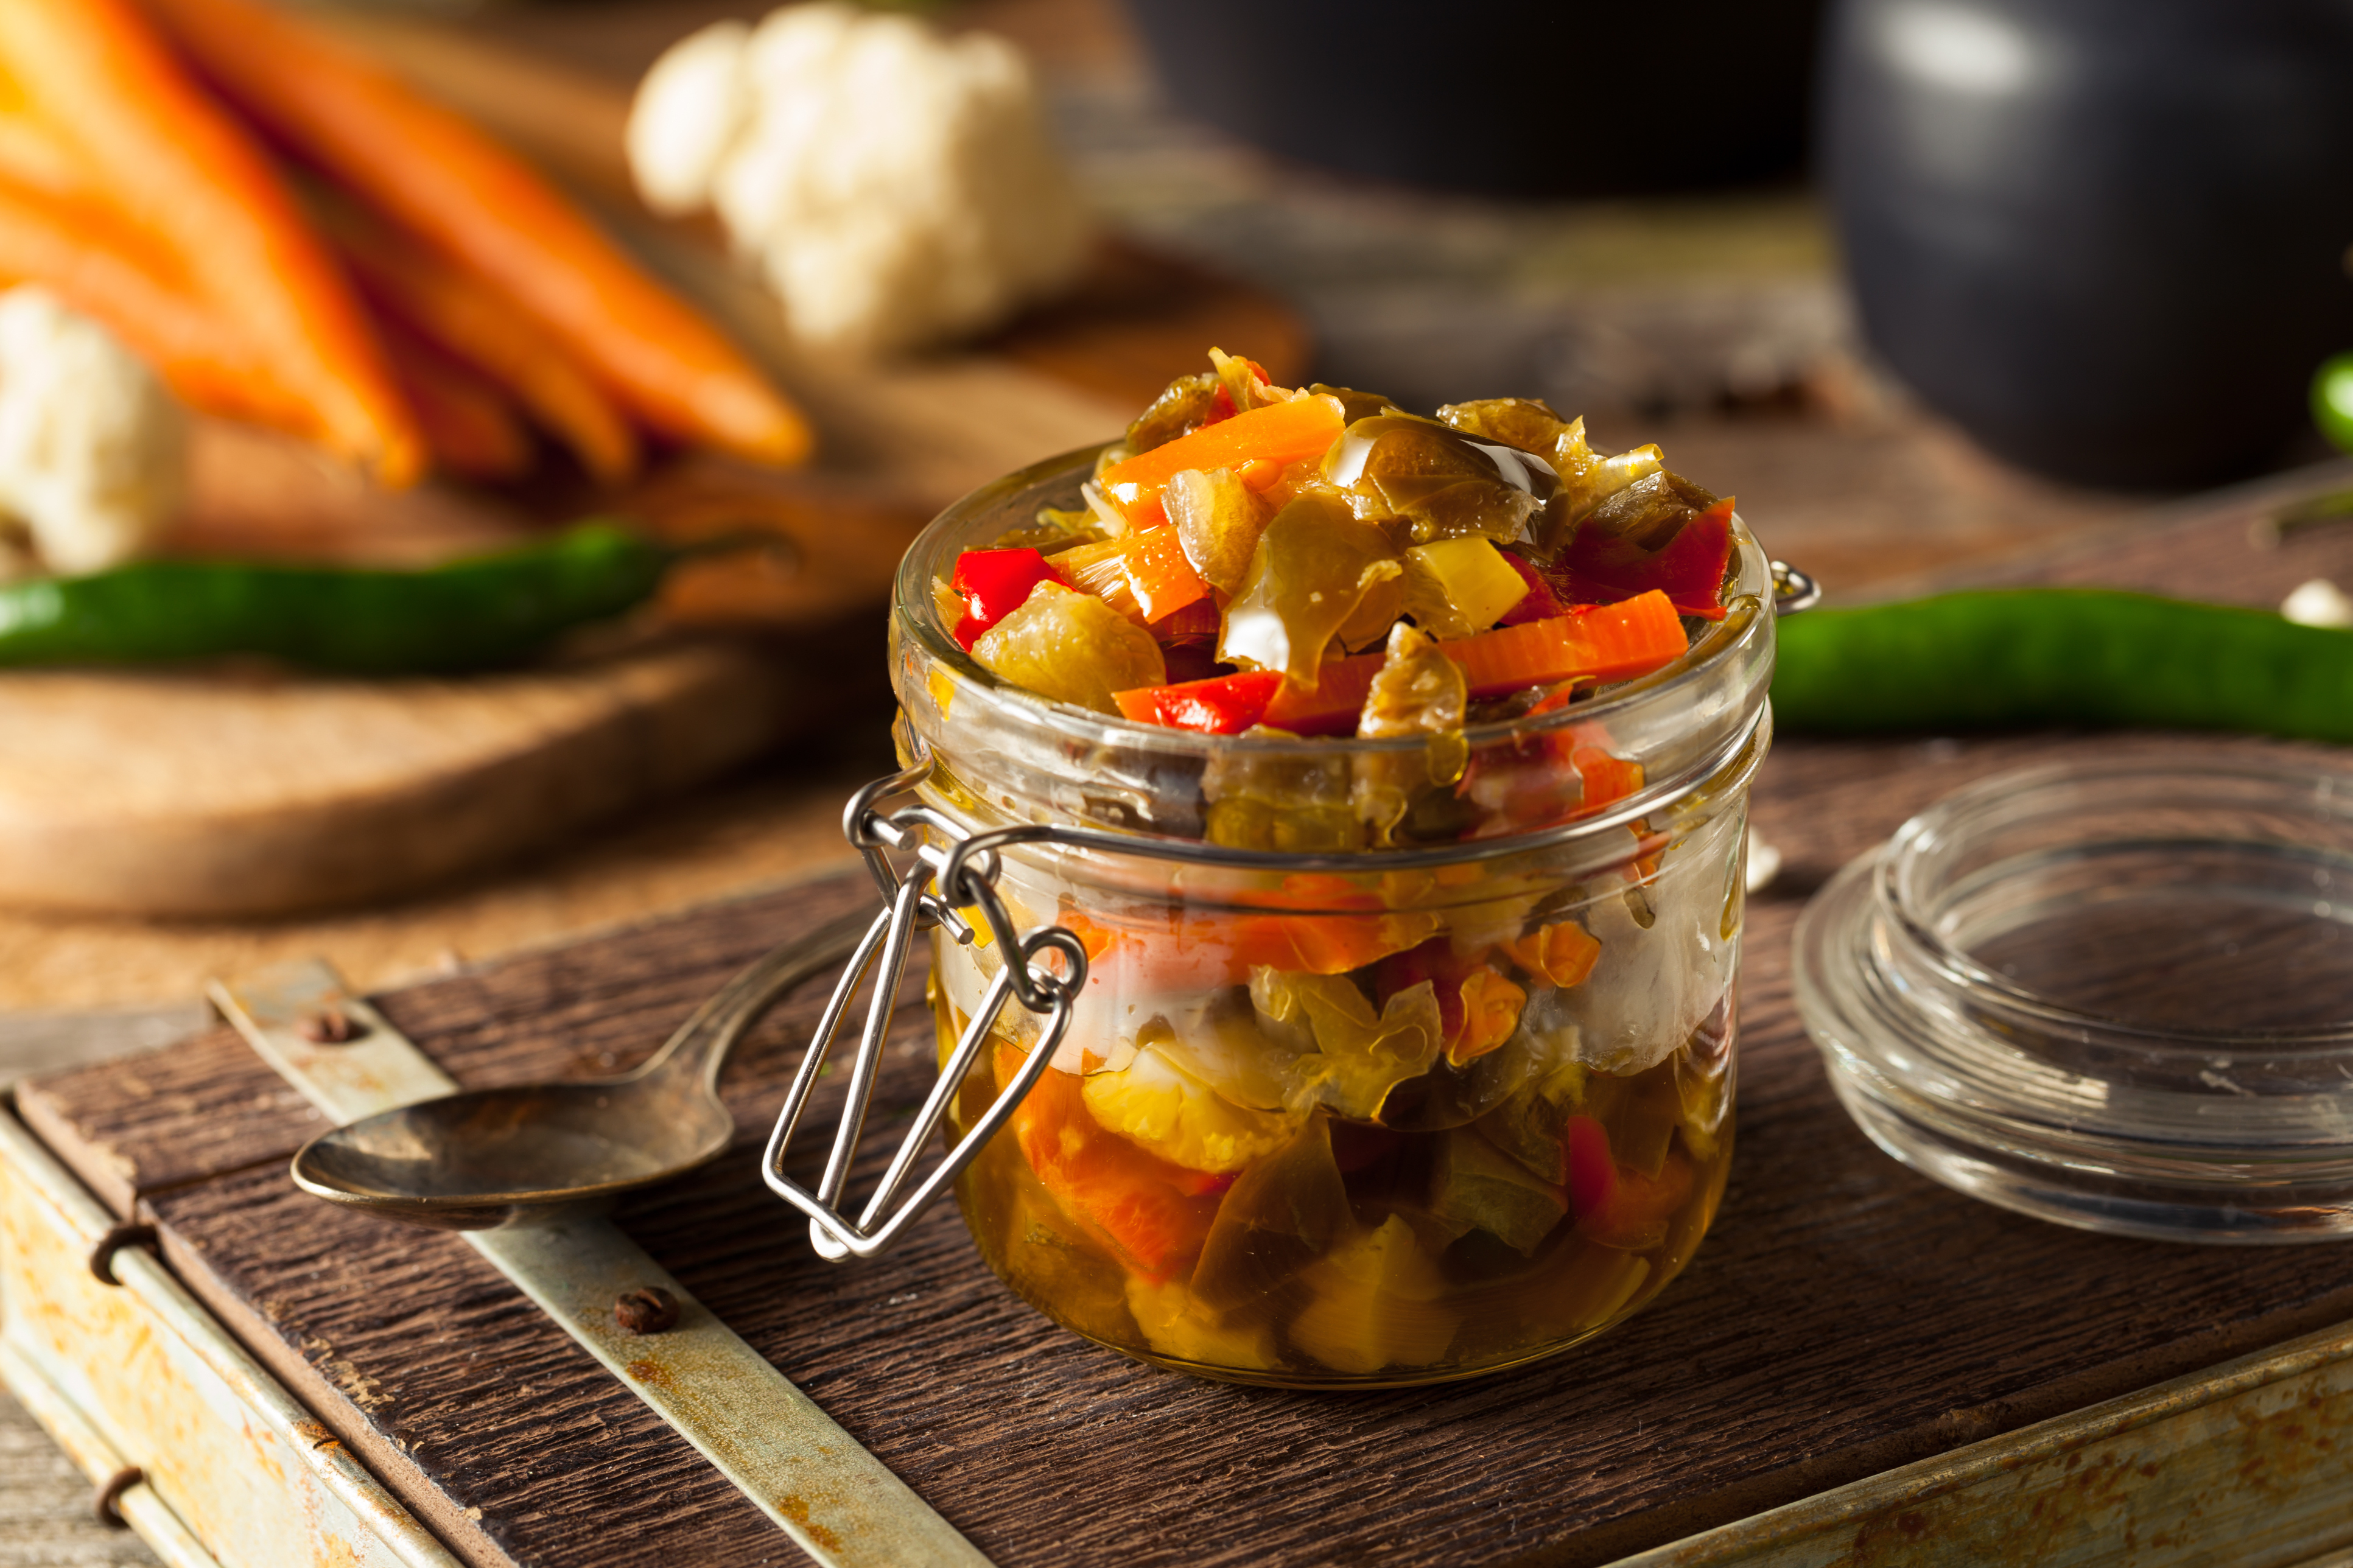 The right choice of peppers makes all the difference in your giardiniera's flavor.